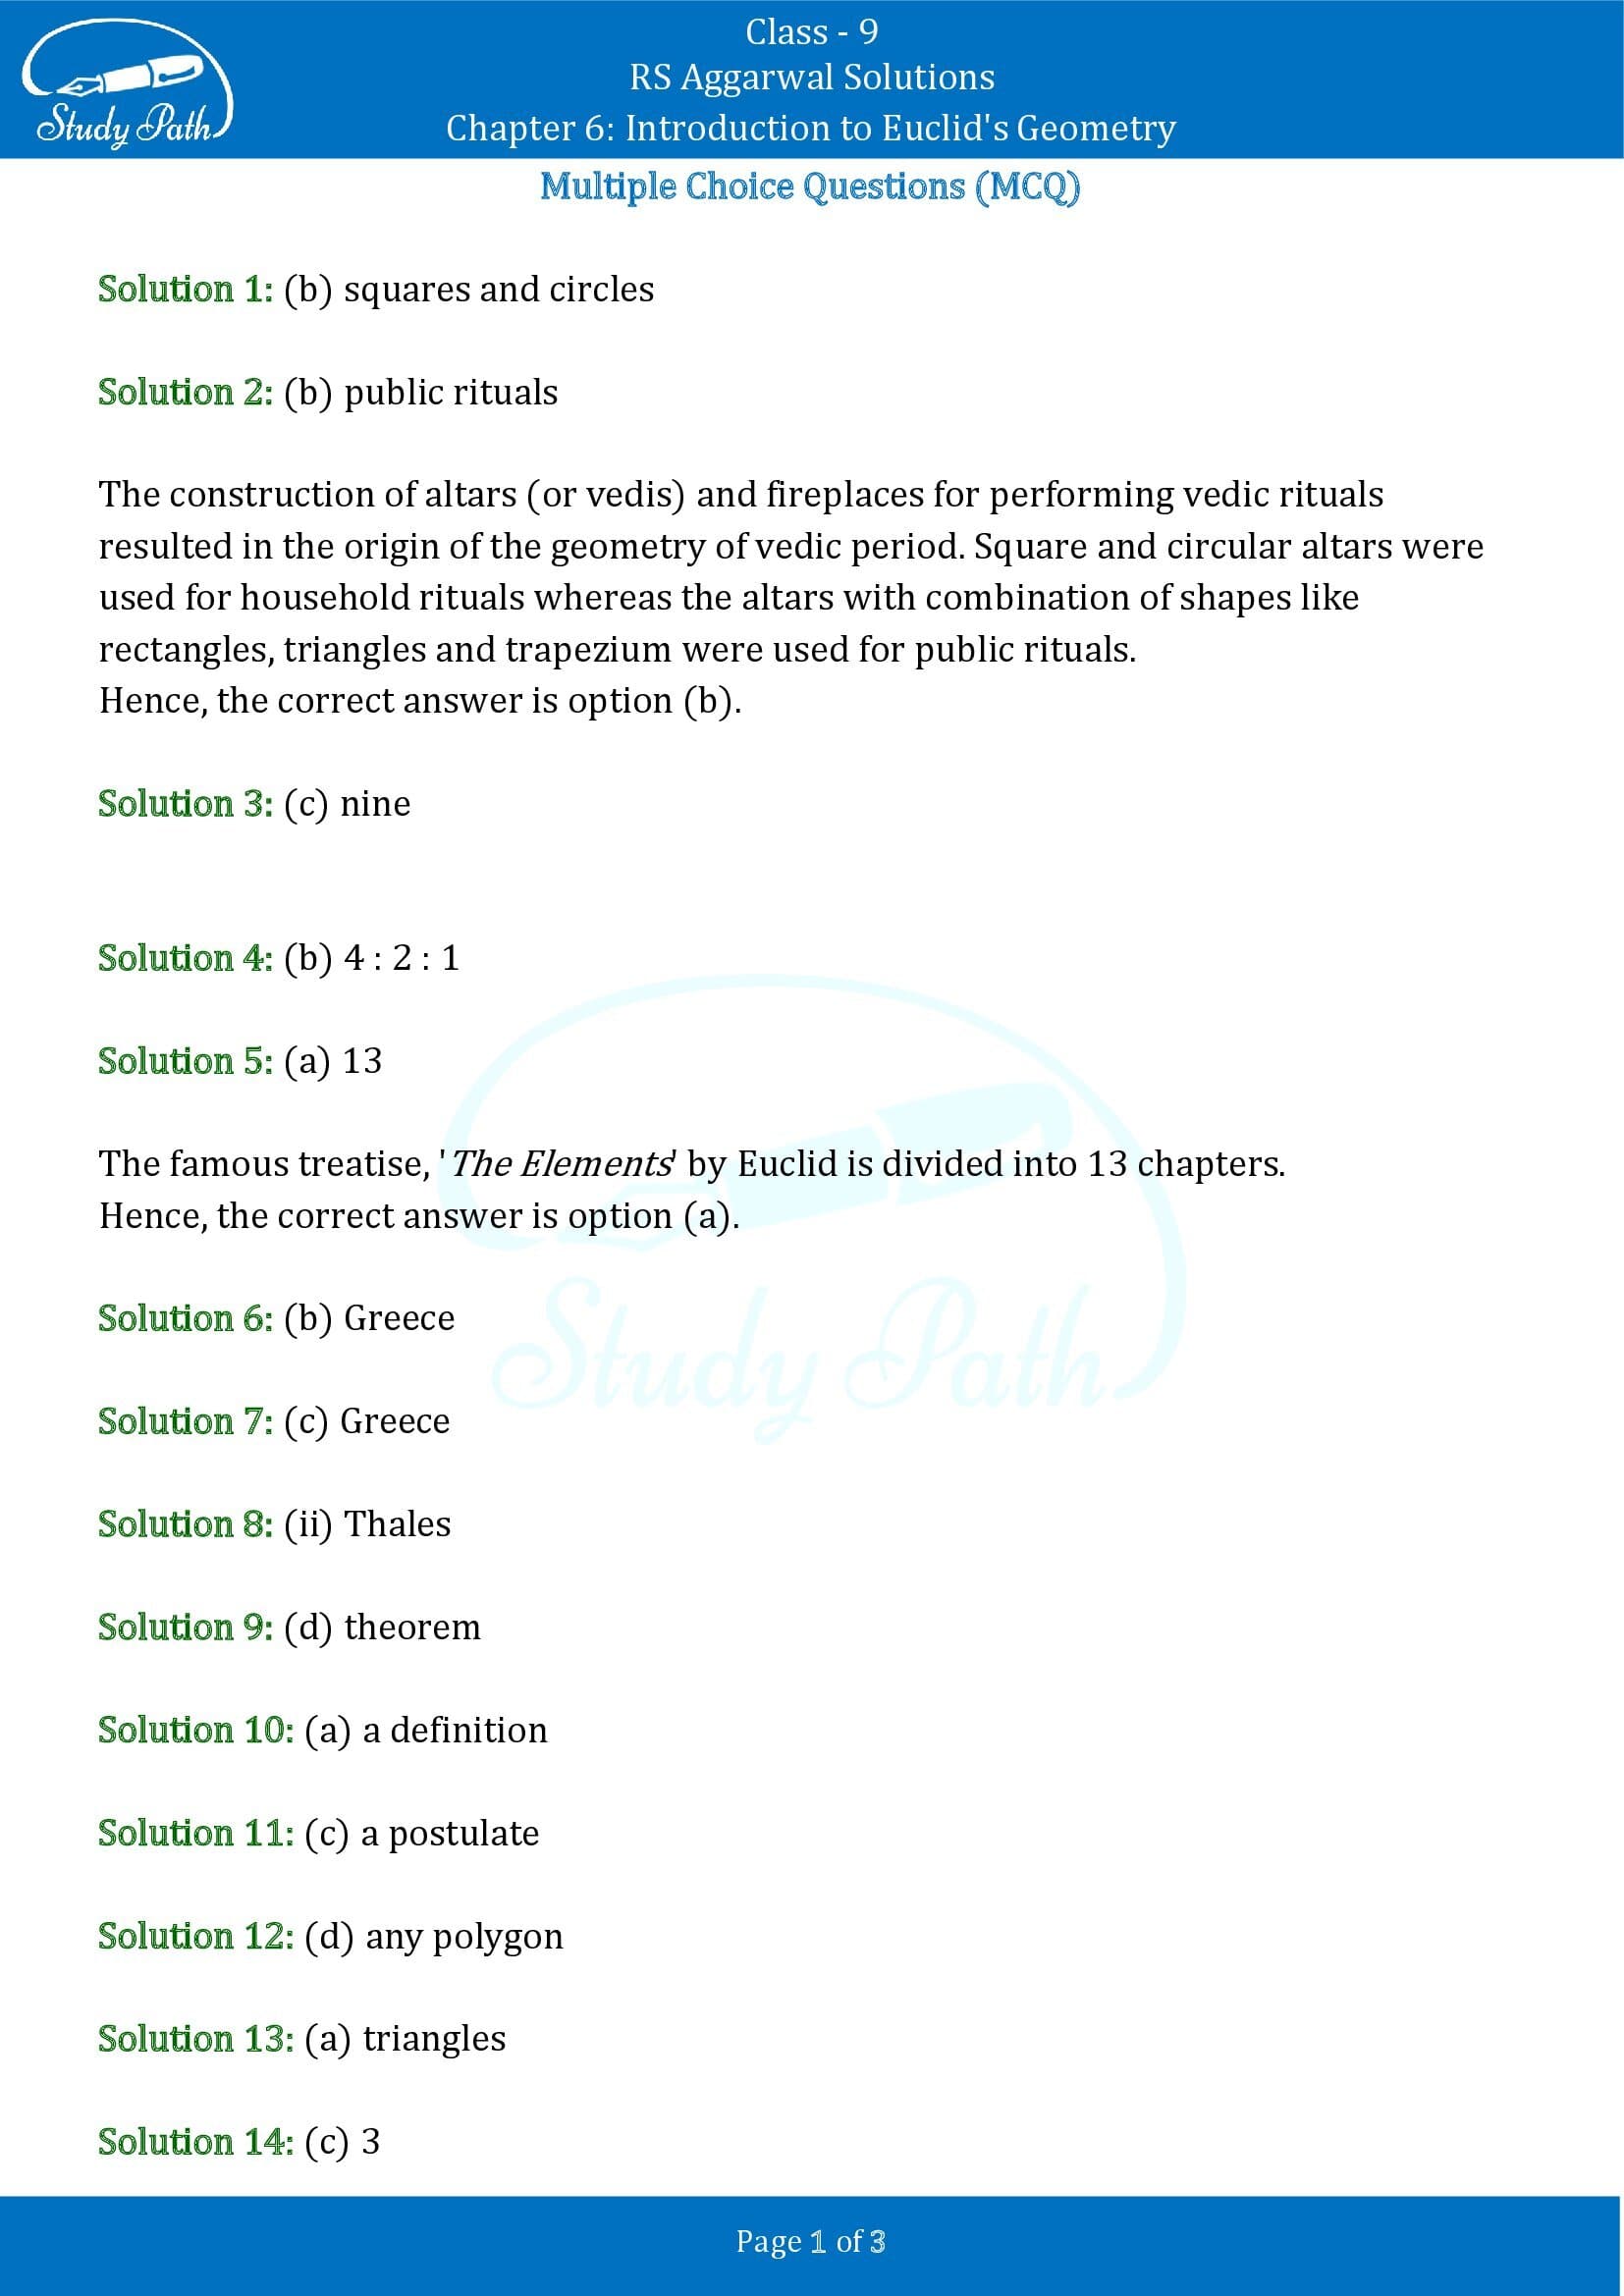 RS Aggarwal Solutions Class 9 Chapter 6 Introduction to Euclids Geometry Multiple Choice Questions MCQs 00001